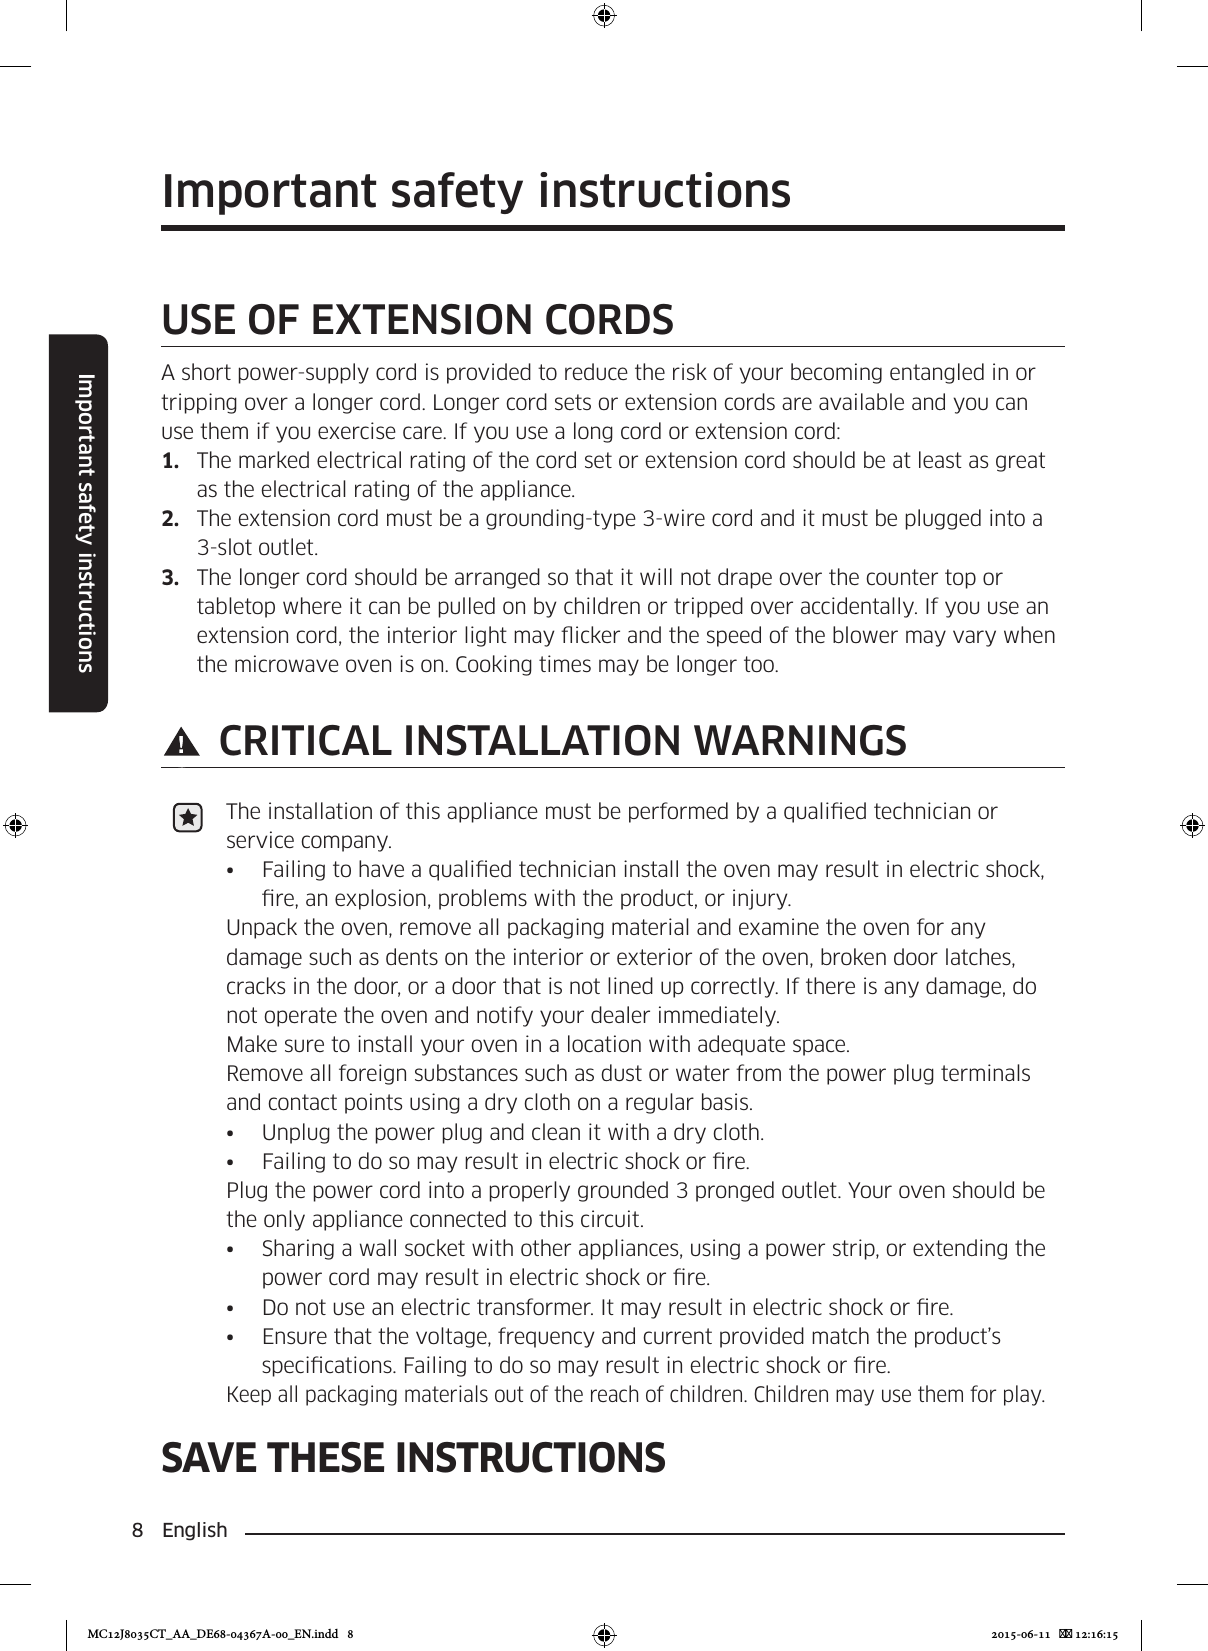 8  EnglishImportant safety instructionsSAVE THESE INSTRUCTIONSImportant safety instructionsUSE OF EXTENSION CORDSA short power-supply cord is provided to reduce the risk of your becoming entangled in or tripping over a longer cord. Longer cord sets or extension cords are available and you can use them if you exercise care. If you use a long cord or extension cord:1.  The marked electrical rating of the cord set or extension cord should be at least as great as the electrical rating of the appliance.2.  The extension cord must be a grounding-type 3-wire cord and it must be plugged into a 3-slot outlet.3.  The longer cord should be arranged so that it will not drape over the counter top or tabletop where it can be pulled on by children or tripped over accidentally. If you use an extension cord, the interior light may icker and the speed of the blower may vary when the microwave oven is on. Cooking times may be longer too. CRITICAL INSTALLATION WARNINGSThe installation of this appliance must be performed by a qualied technician or service company.•  Failing to have a qualied technician install the oven may result in electric shock, re, an explosion, problems with the product, or injury.Unpack the oven, remove all packaging material and examine the oven for any damage such as dents on the interior or exterior of the oven, broken door latches, cracks in the door, or a door that is not lined up correctly. If there is any damage, do not operate the oven and notify your dealer immediately.Make sure to install your oven in a location with adequate space.Remove all foreign substances such as dust or water from the power plug terminals and contact points using a dry cloth on a regular basis.•  Unplug the power plug and clean it with a dry cloth.•  Failing to do so may result in electric shock or re.Plug the power cord into a properly grounded 3 pronged outlet. Your oven should be the only appliance connected to this circuit.•  Sharing a wall socket with other appliances, using a power strip, or extending the power cord may result in electric shock or re.•  Do not use an electric transformer. It may result in electric shock or re.•  Ensure that the voltage, frequency and current provided match the product’s specications. Failing to do so may result in electric shock or re.Keep all packaging materials out of the reach of children. Children may use them for play.MC12J8035CT_AA_DE68-04367A-00_EN.indd   8 2015-06-11    12:16:15